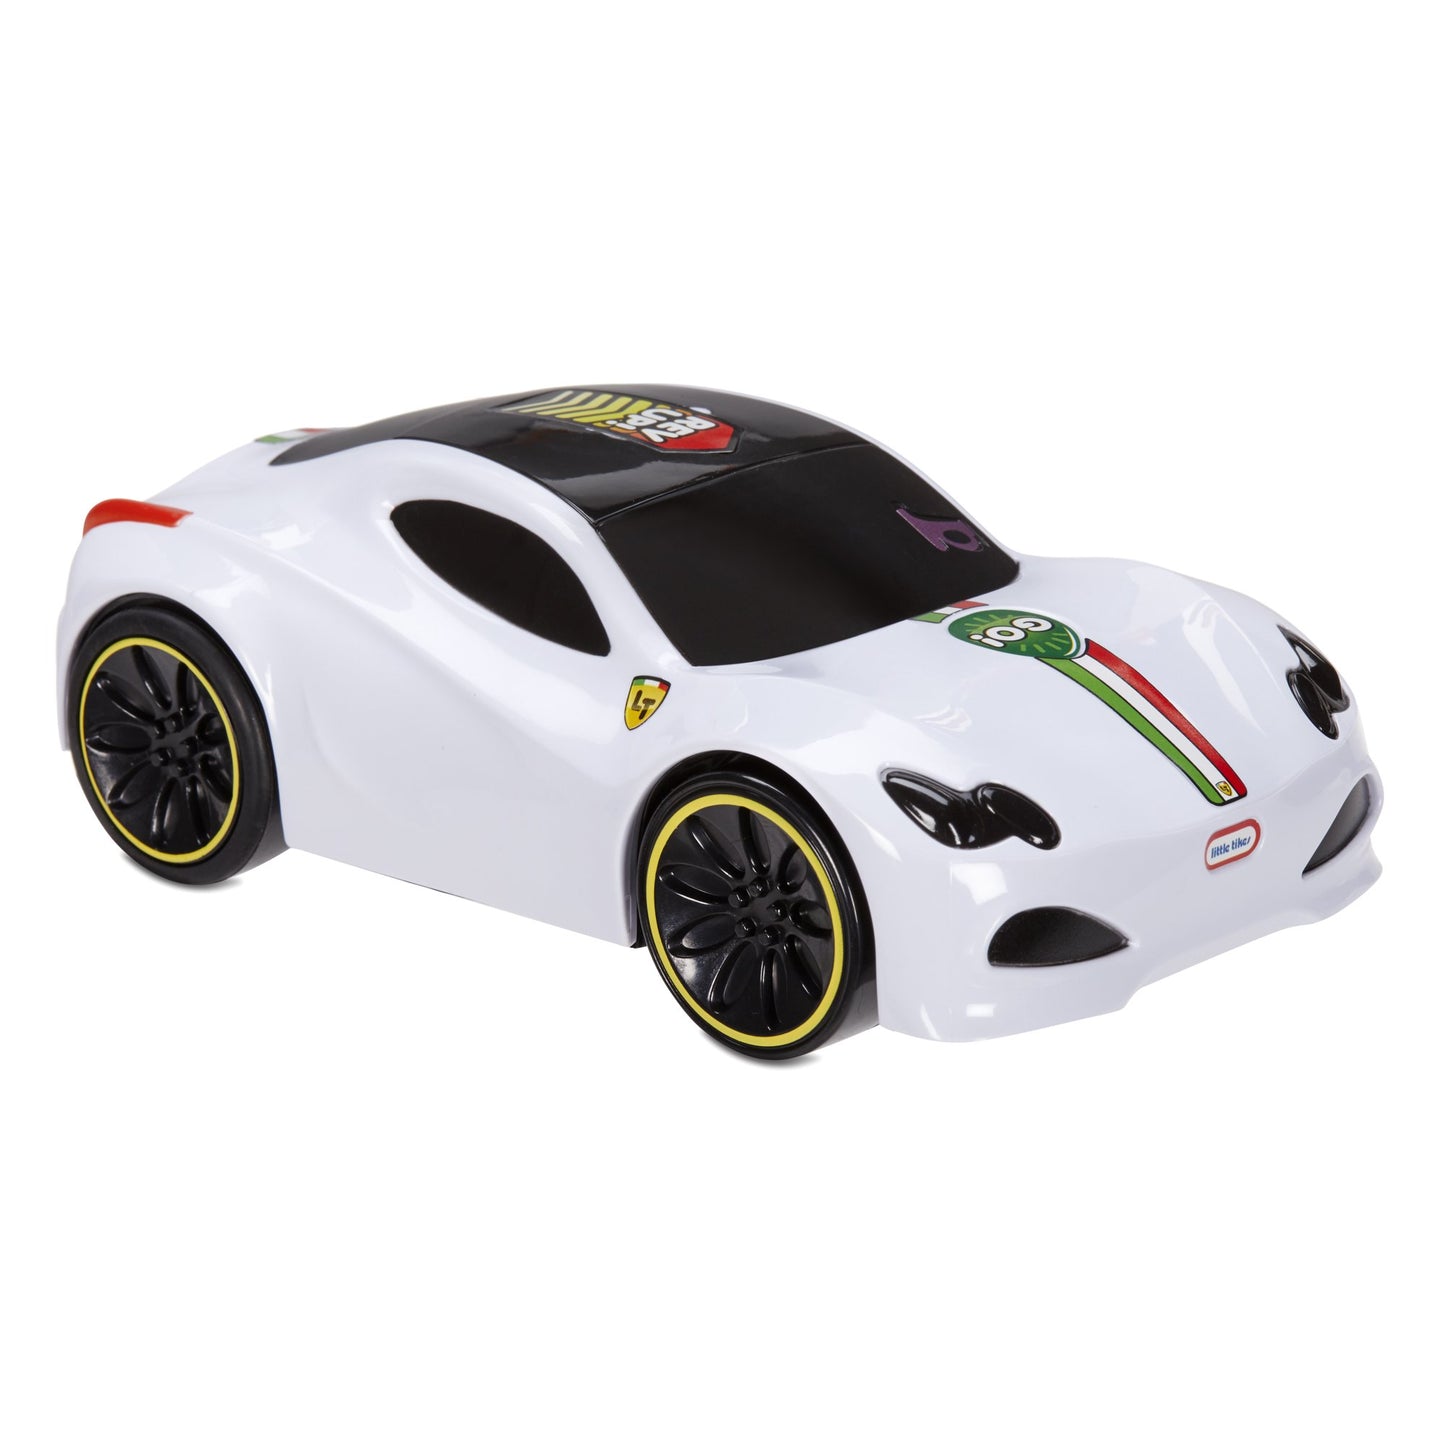 Little Tikes Touch 'N' Go Racers Vehicle - White Sports Car Toy Car for Kids